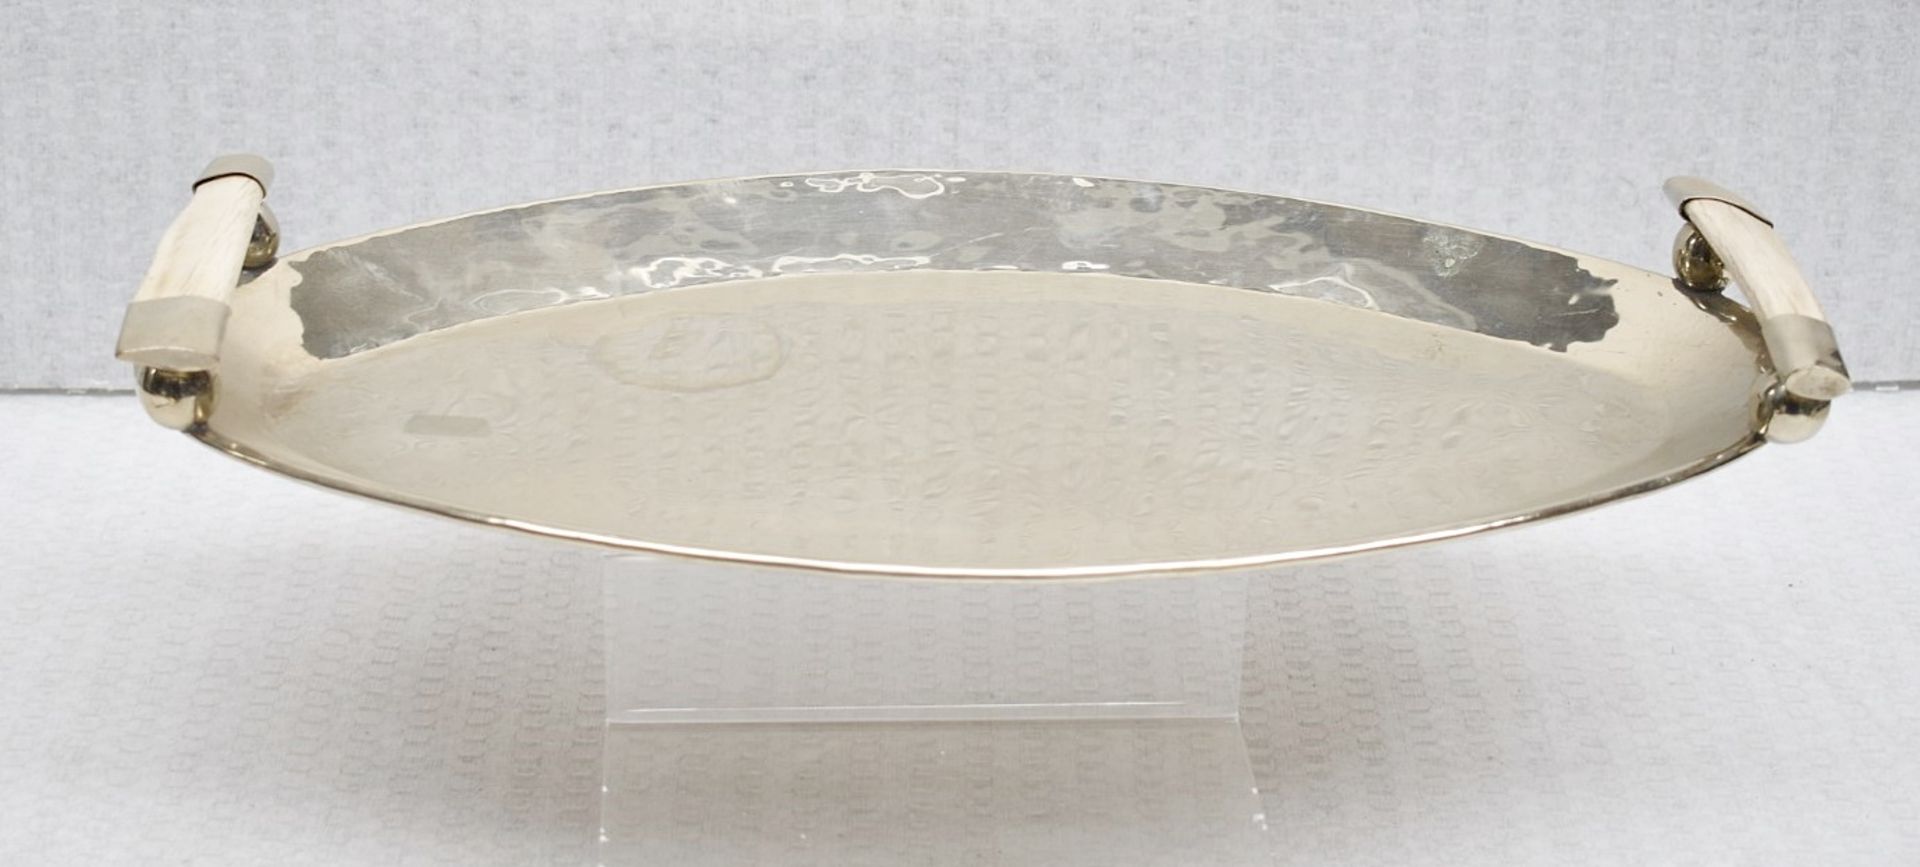 1 x Vintage Bone Handled Serving Tray - Ref: CNT771/WH2/C24 - CL845 - NO VAT ON THE HAMMER - - Image 2 of 3